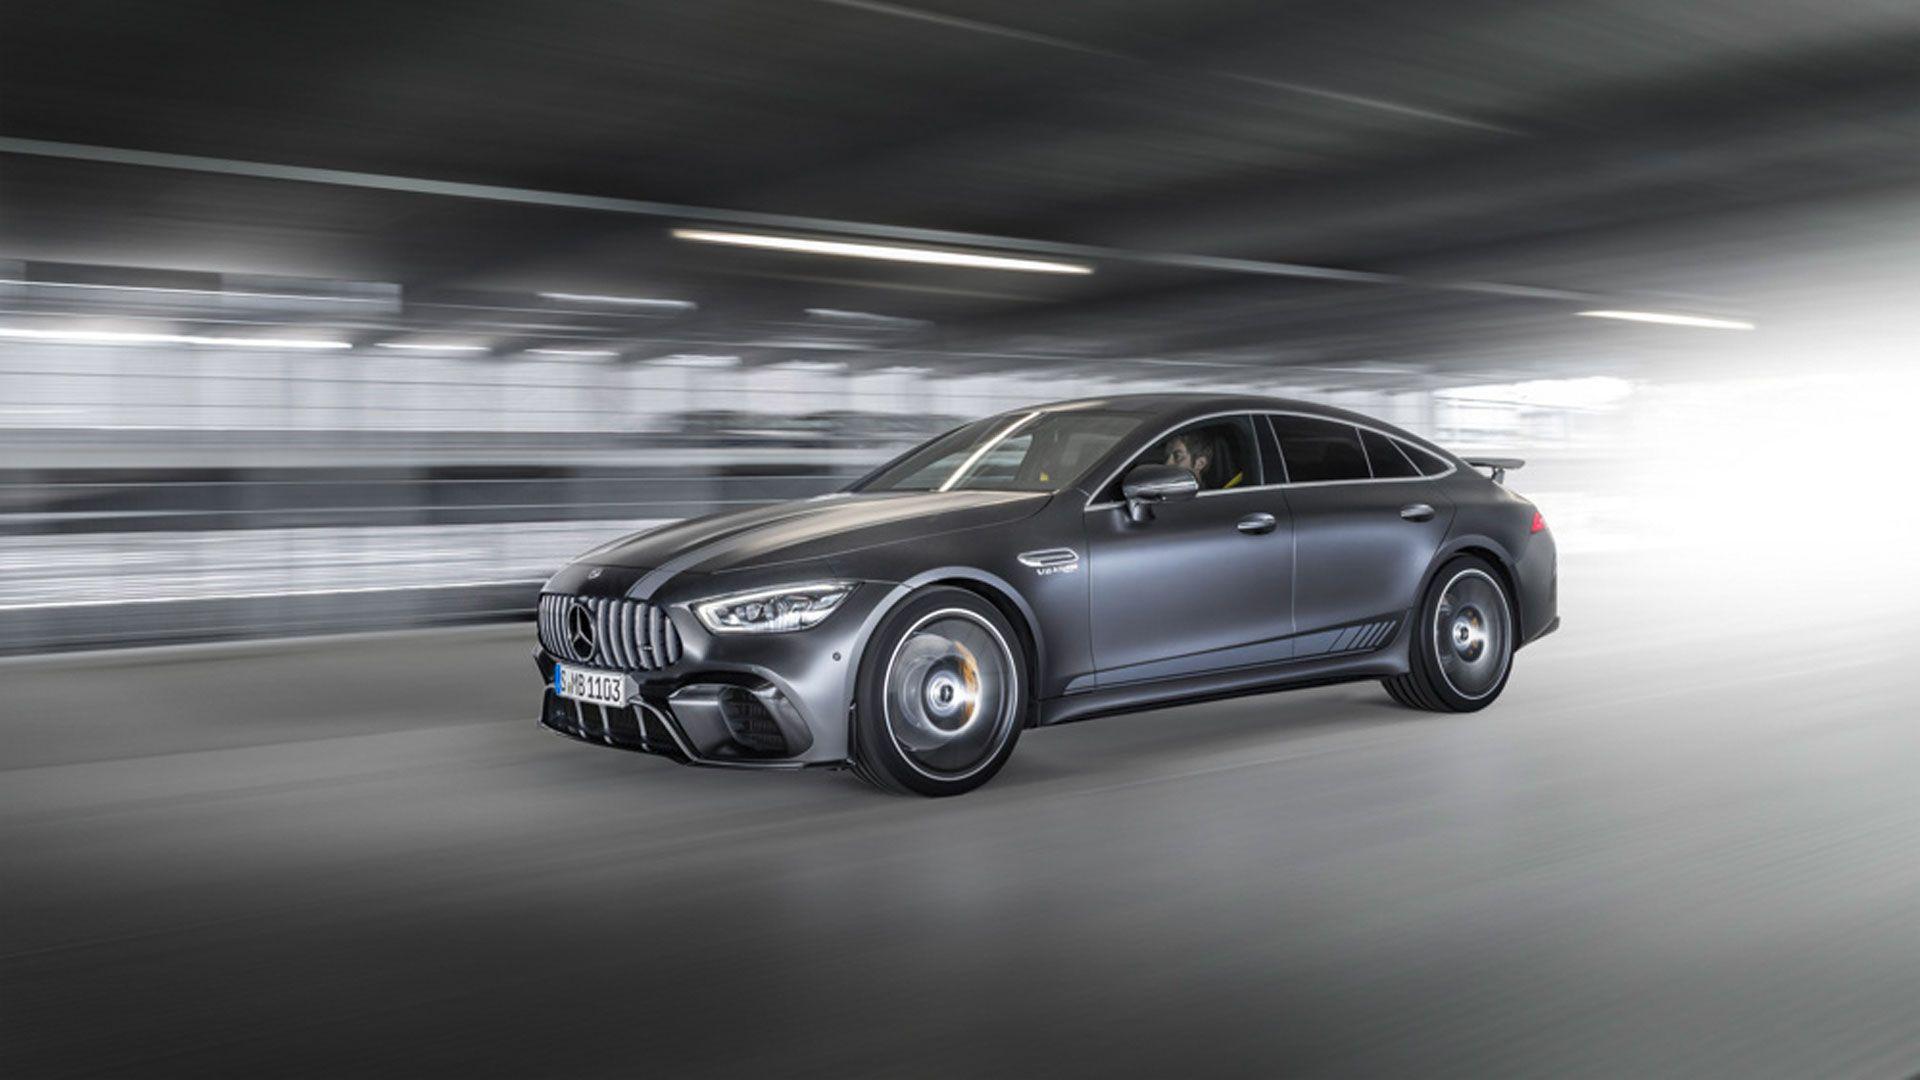 AMG 63 Logo - The new Mercedes-AMG GT 63 S 4MATIC+ Edition 1